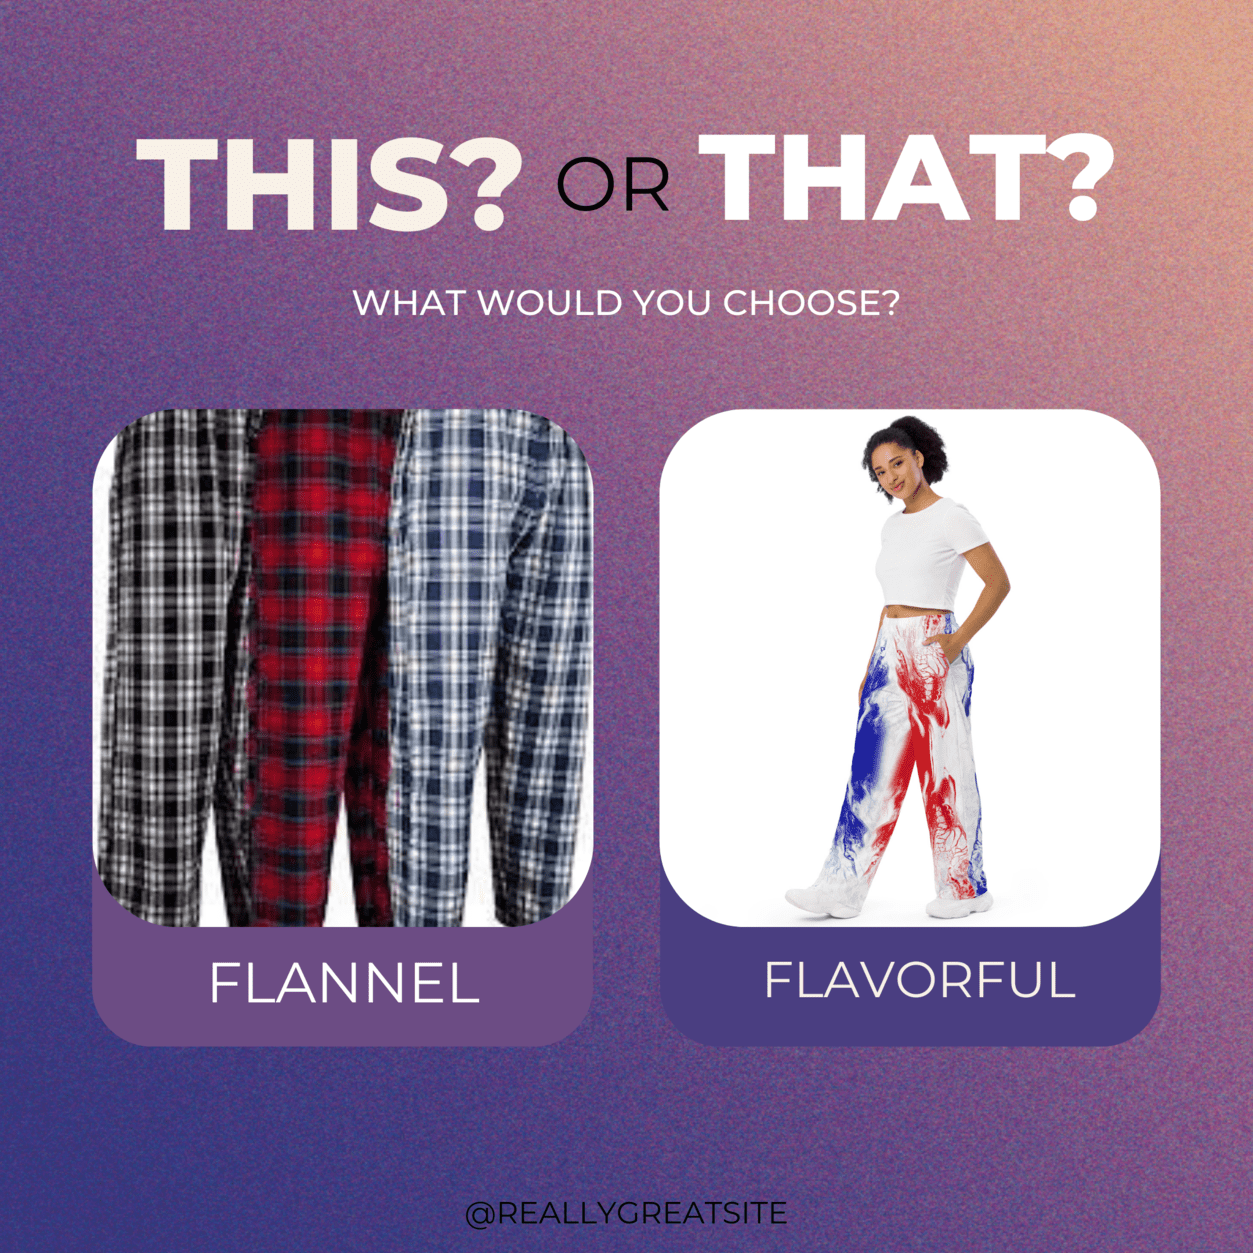 Would you rather wear the same red or blue flannel volleyball pants you've had for the past 2-3 years or is it time to change up and start wearing fresh, fearlessly flamboyant wide legged volleyball workout pants by Volleybragswag in 2023?